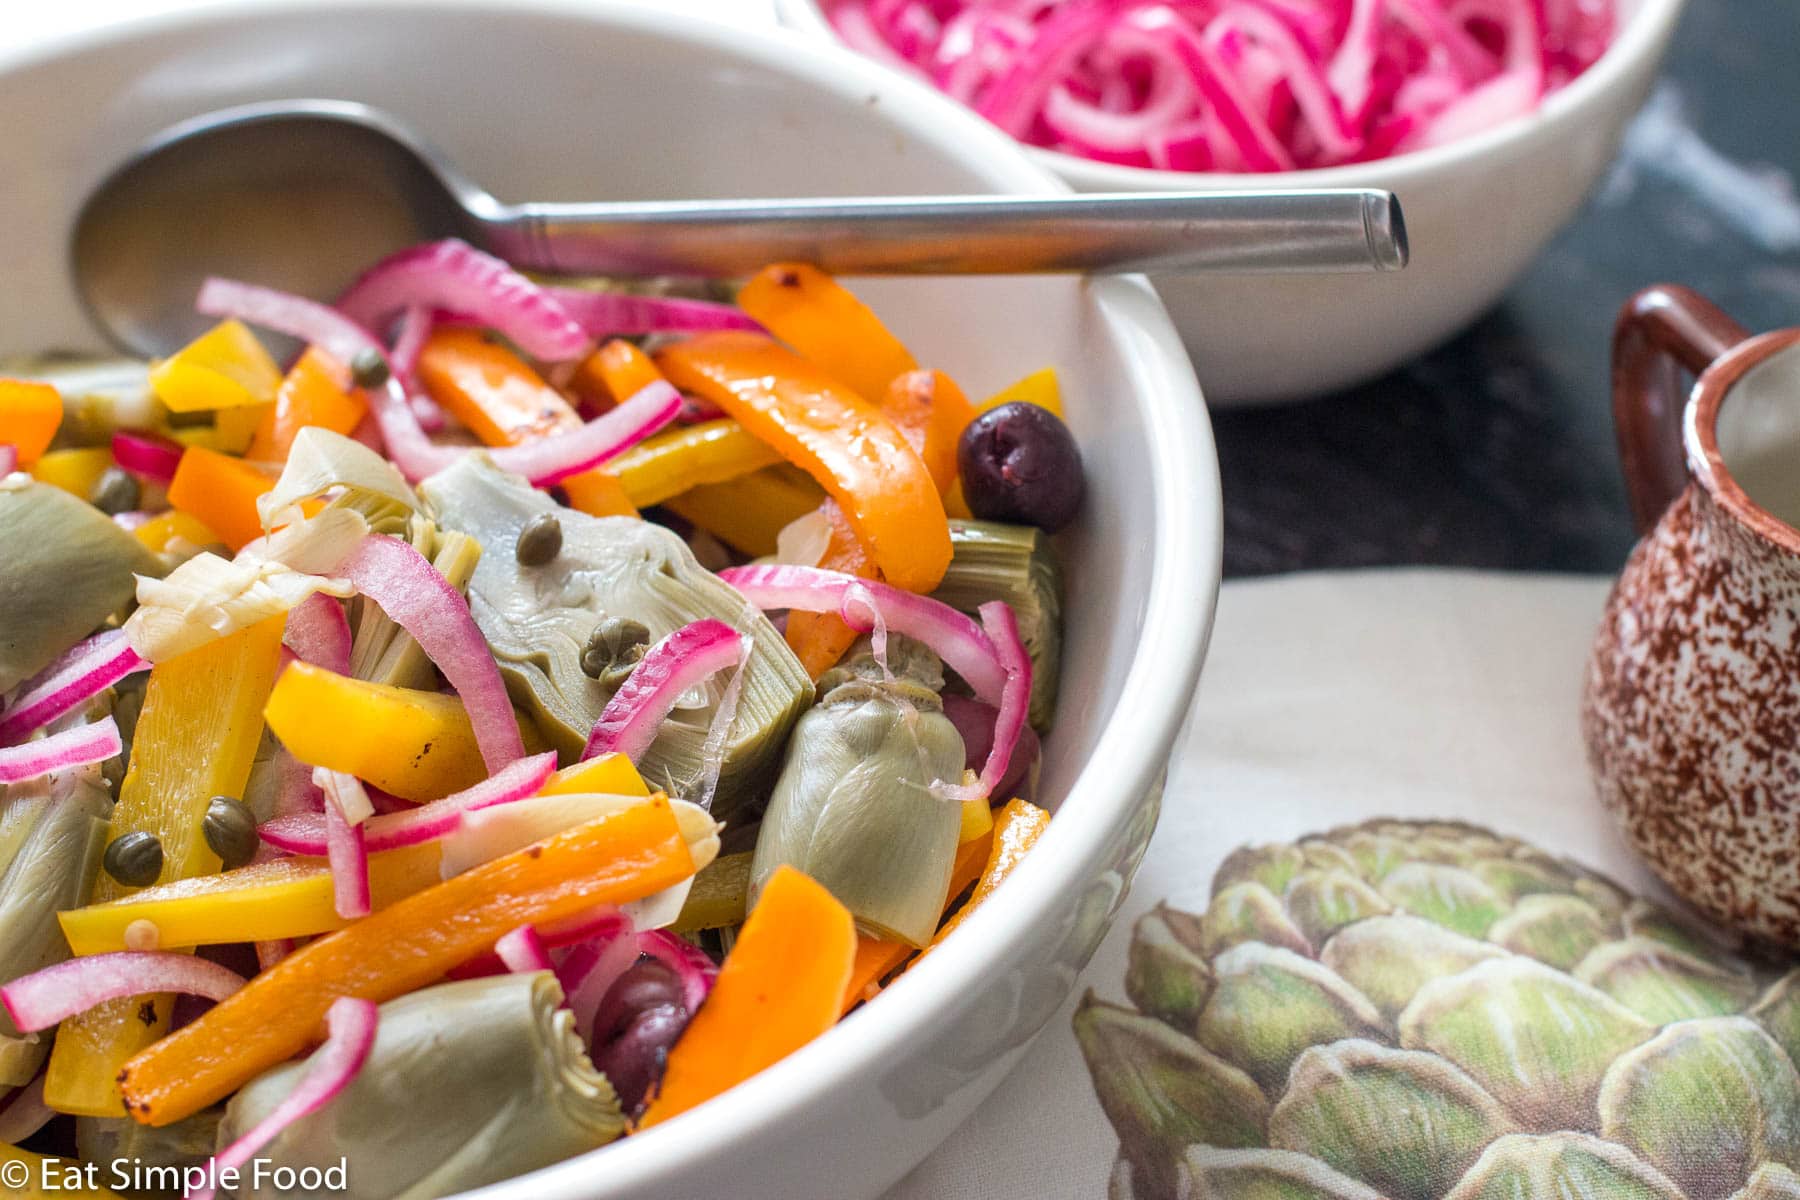 Side view of artichoke salad with kalamata olives, sliced orange peppers, capers and a bowl of pickled red onions on the side.